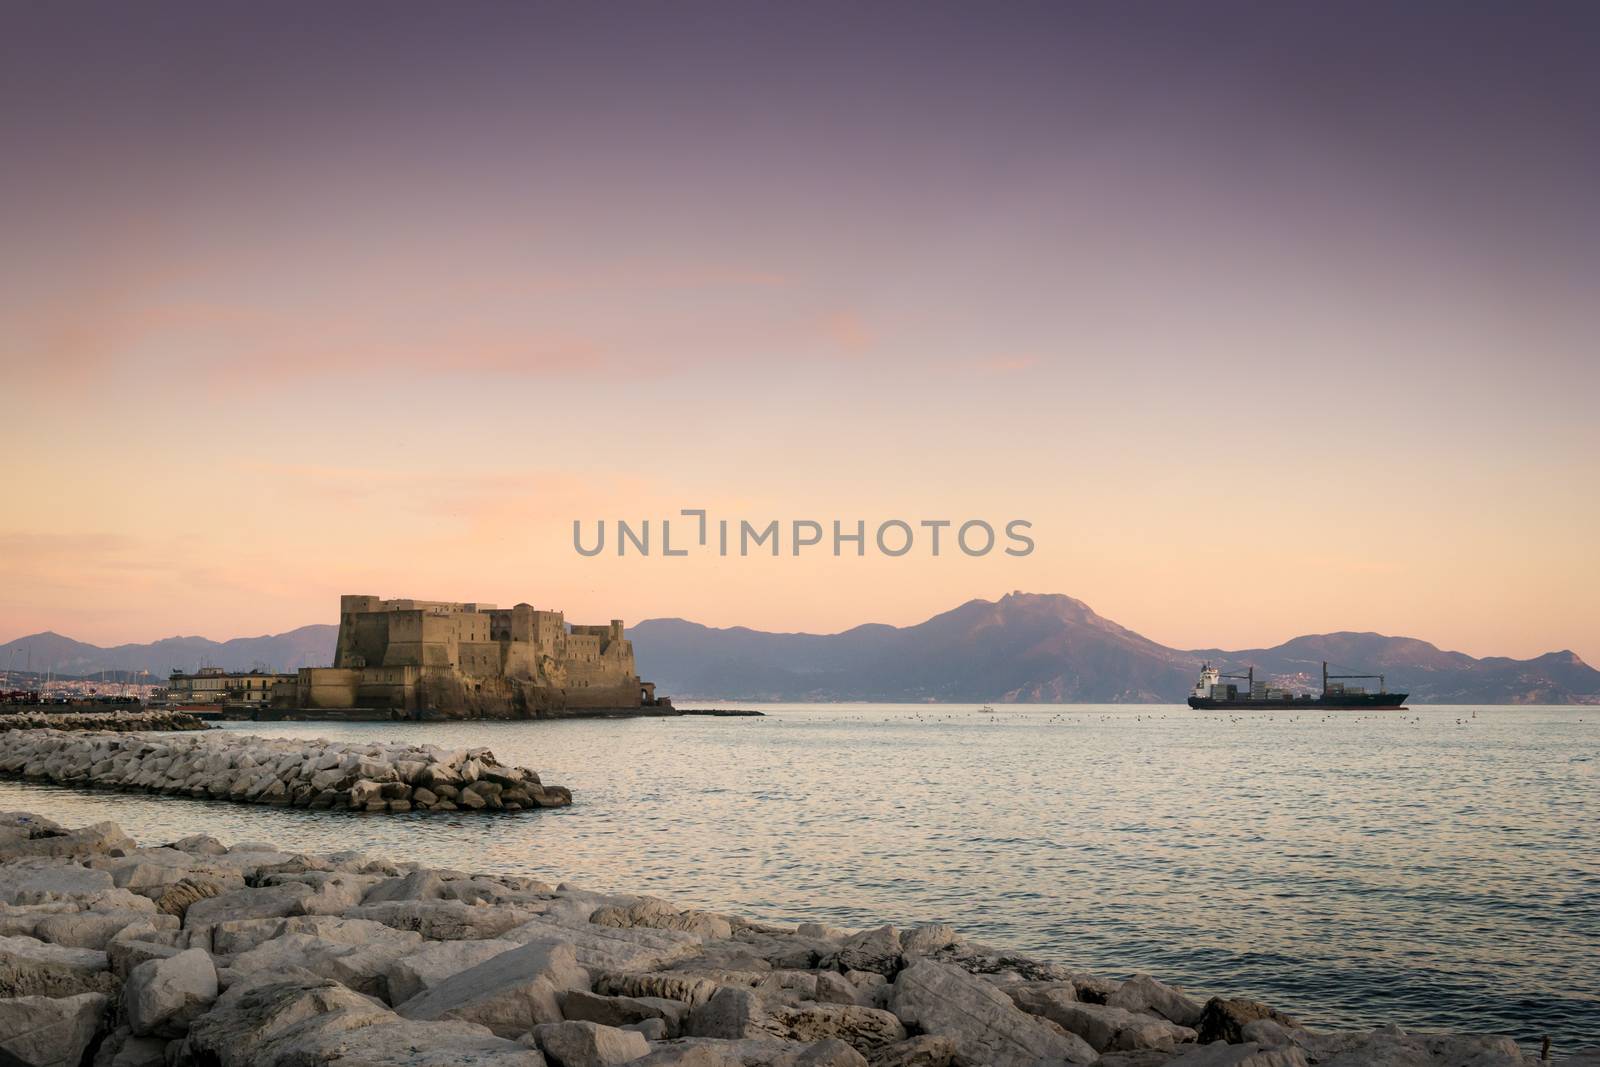 View of Castel dell Ovo in Naples, an ancient fortress on the sea, at dusk